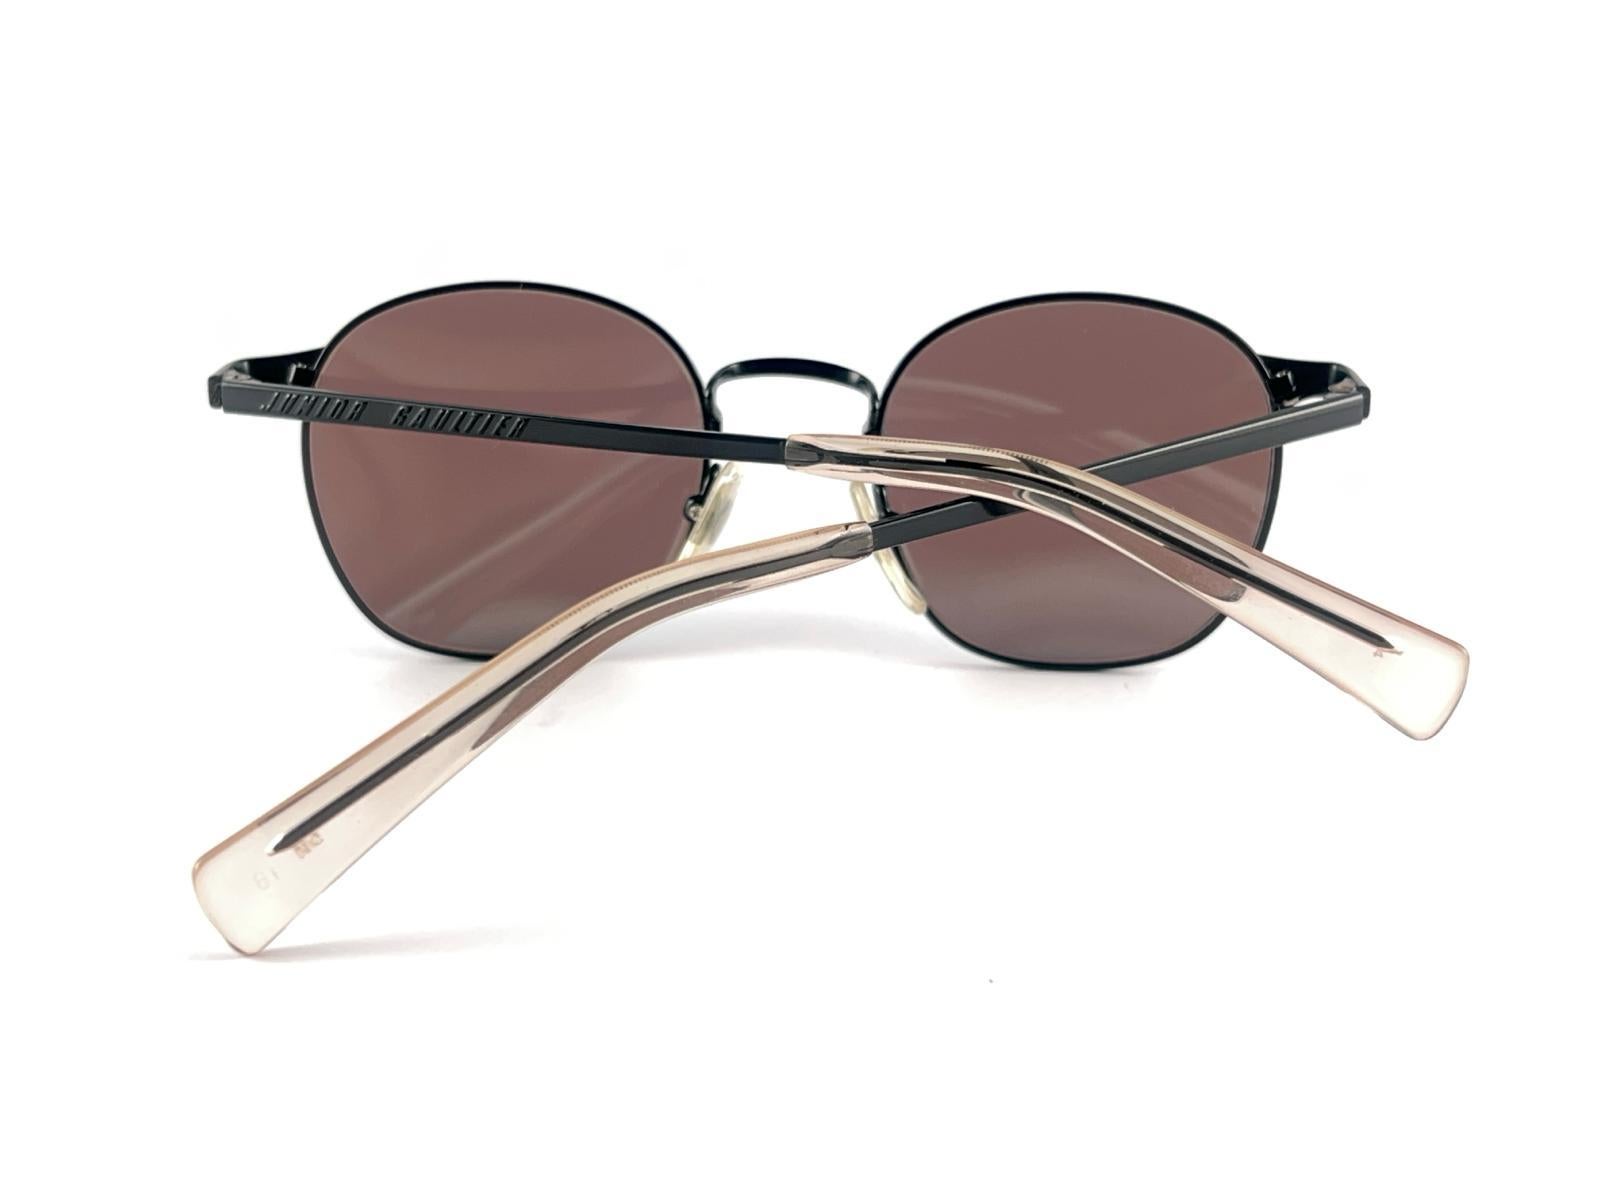 New Jean Paul Gaultier 57 0172 Oval Black Sunglasses 1990's Made in Japan  For Sale 8